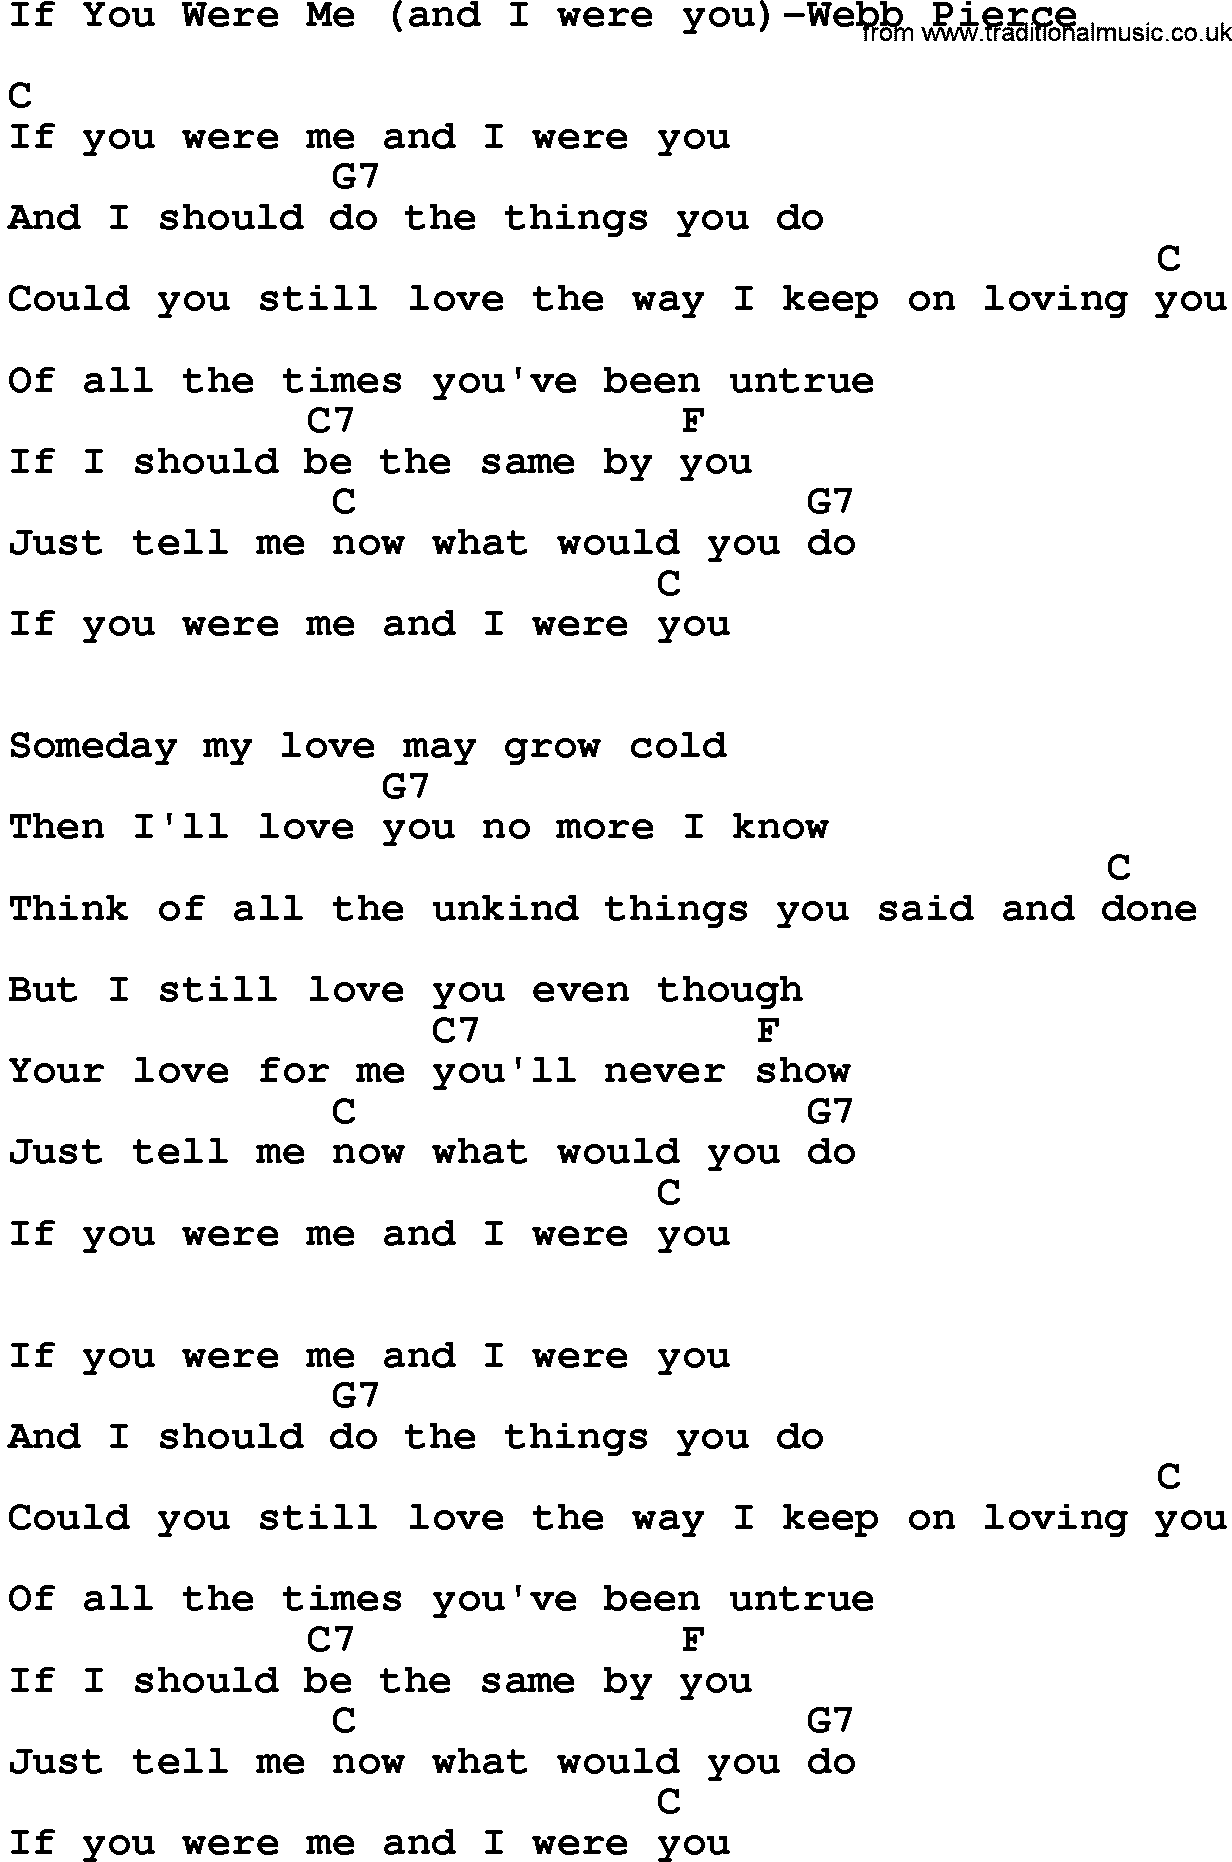 Country music song: If You Were Me(And I Were You)-Webb Pierce lyrics and chords